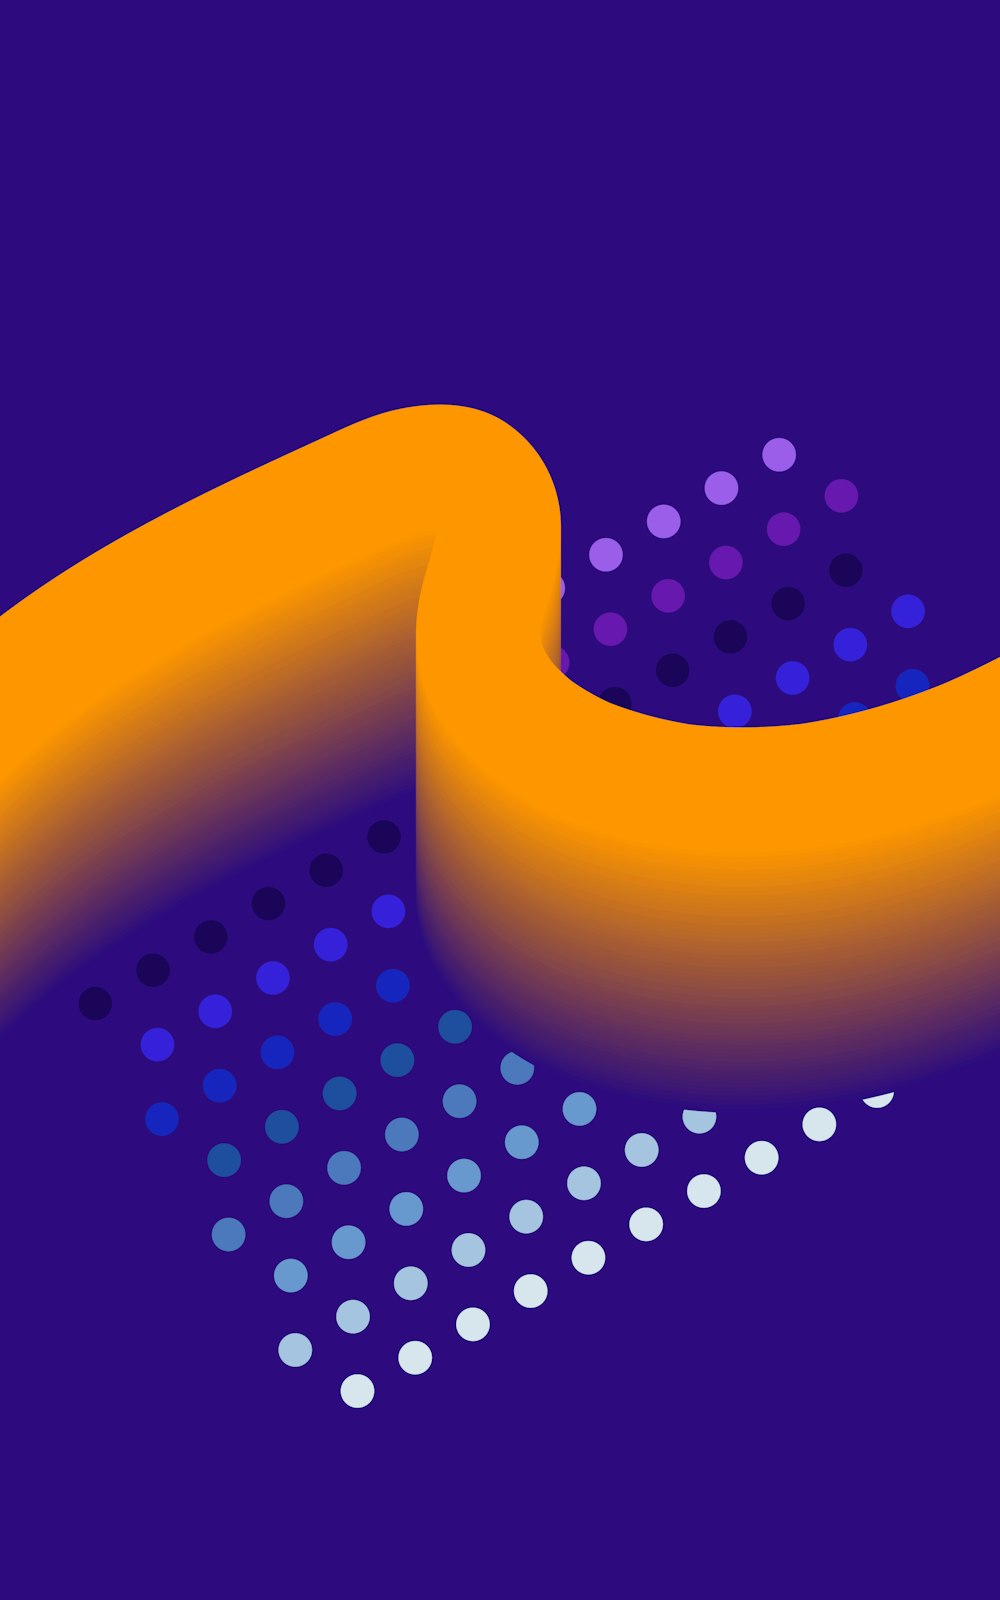 an orange curved object on a purple background